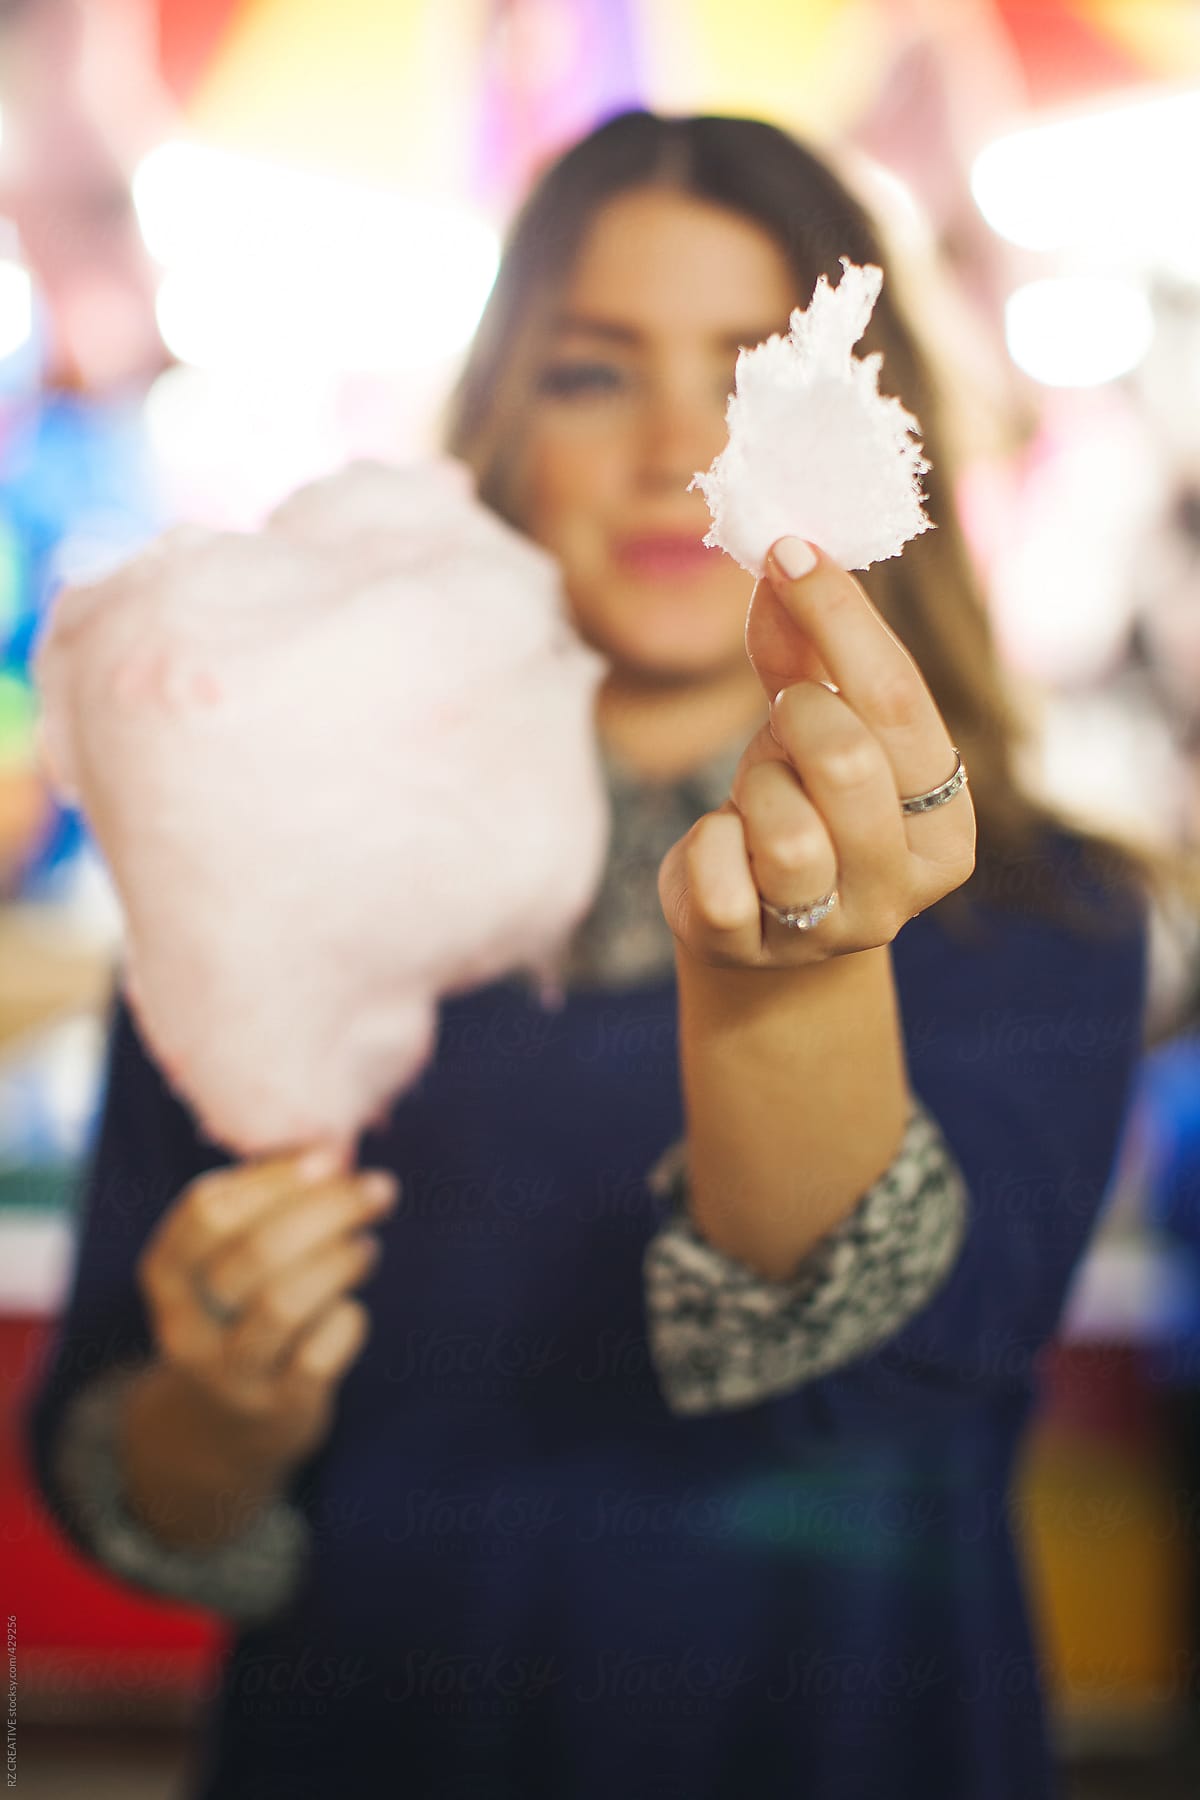 Pretty, stylish girl at a carnival with cotton candy.